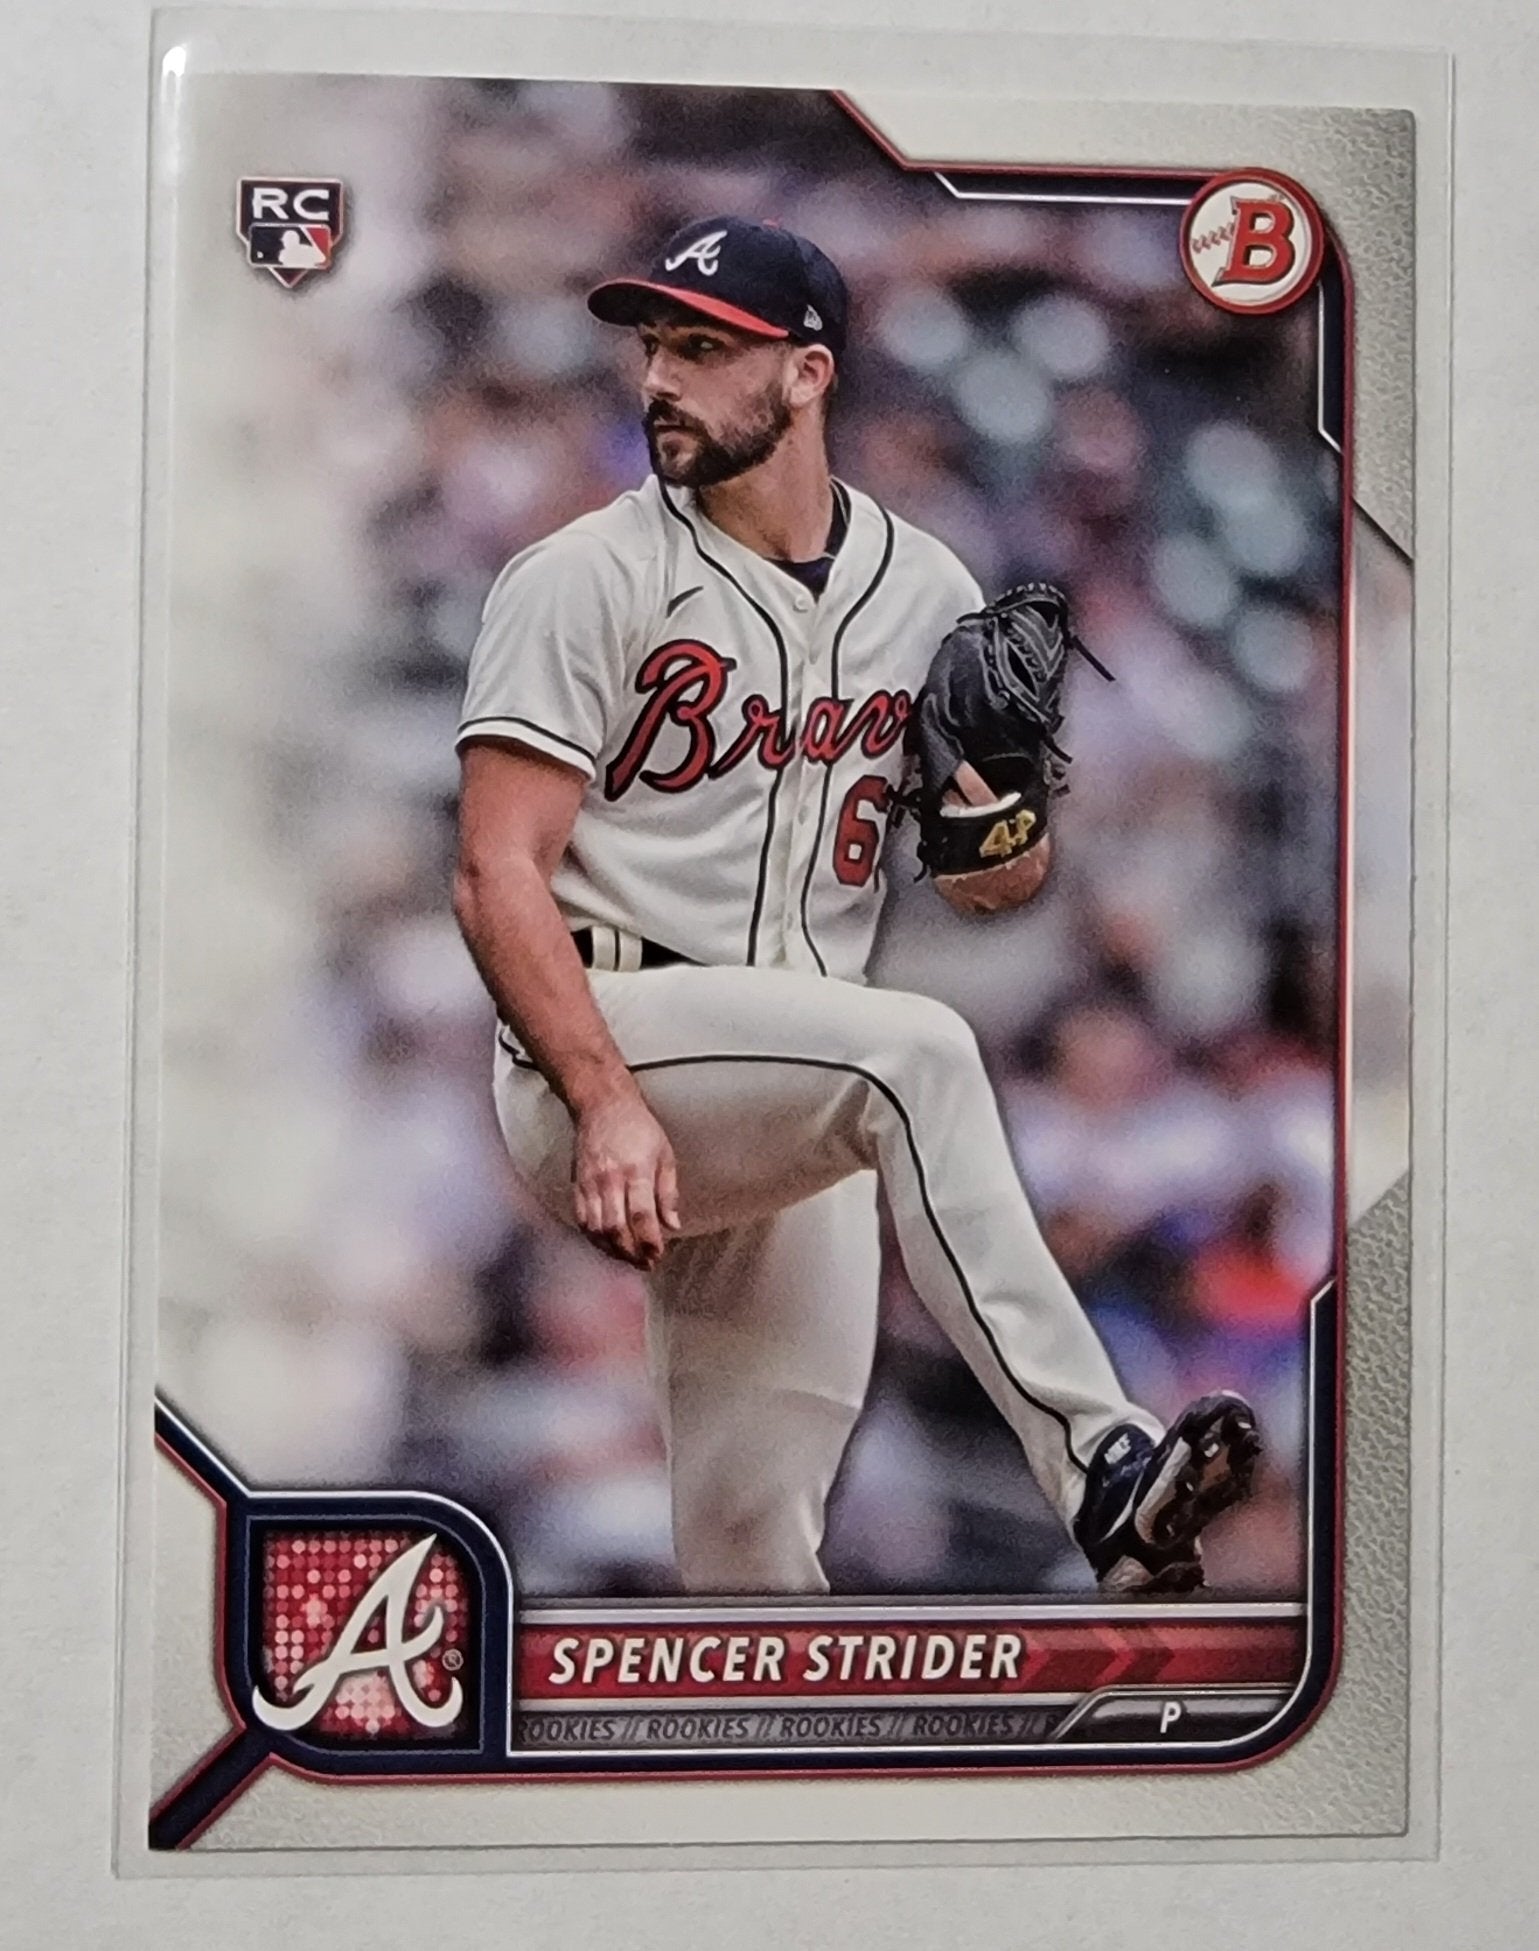 2022 Bowman Spencer Strider Mega Box Paper Rookie Baseball Card AVM1 simple Xclusive Collectibles   